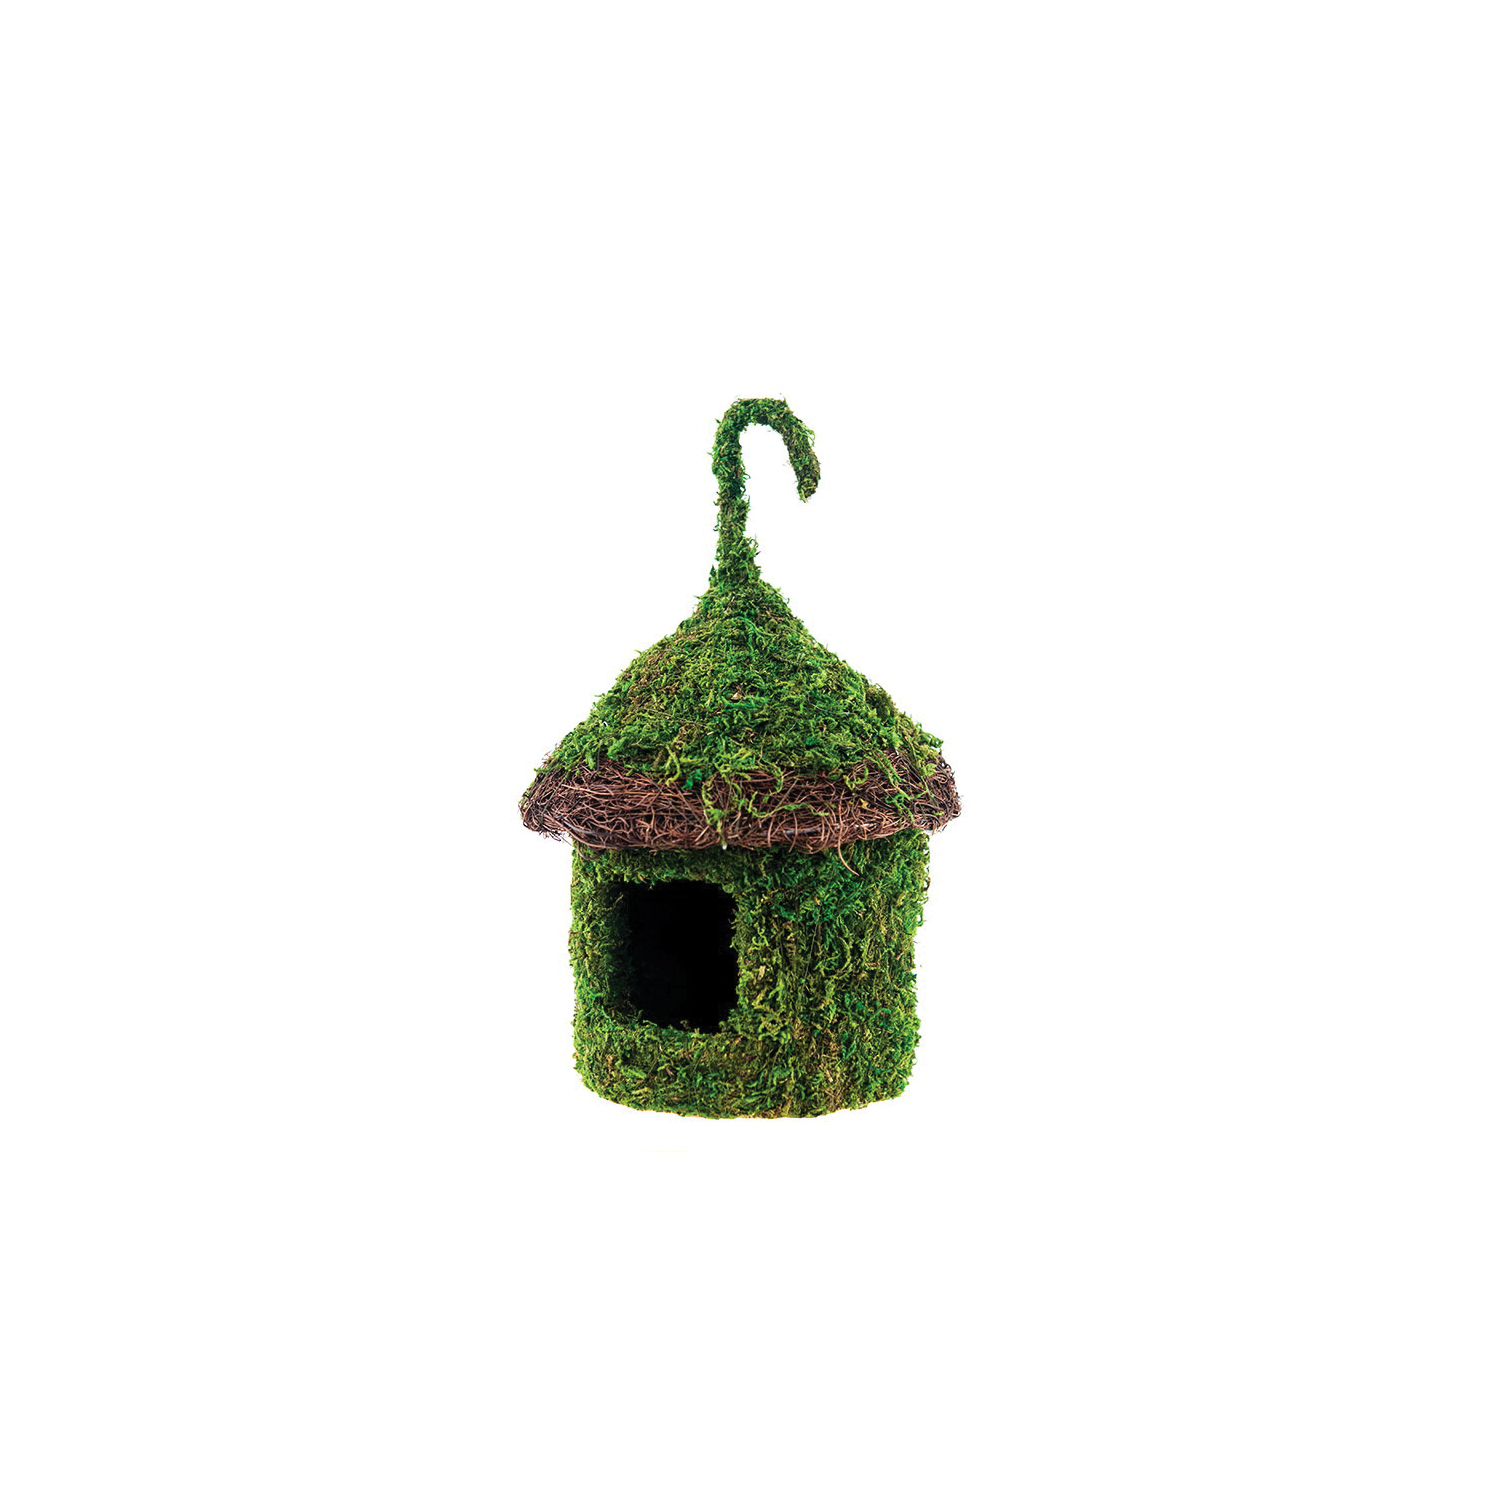 SuperMoss 56019 Decorative Bird House, 6 in W, 7 in H, Rimmed Bungalow, Moss, Green - 1